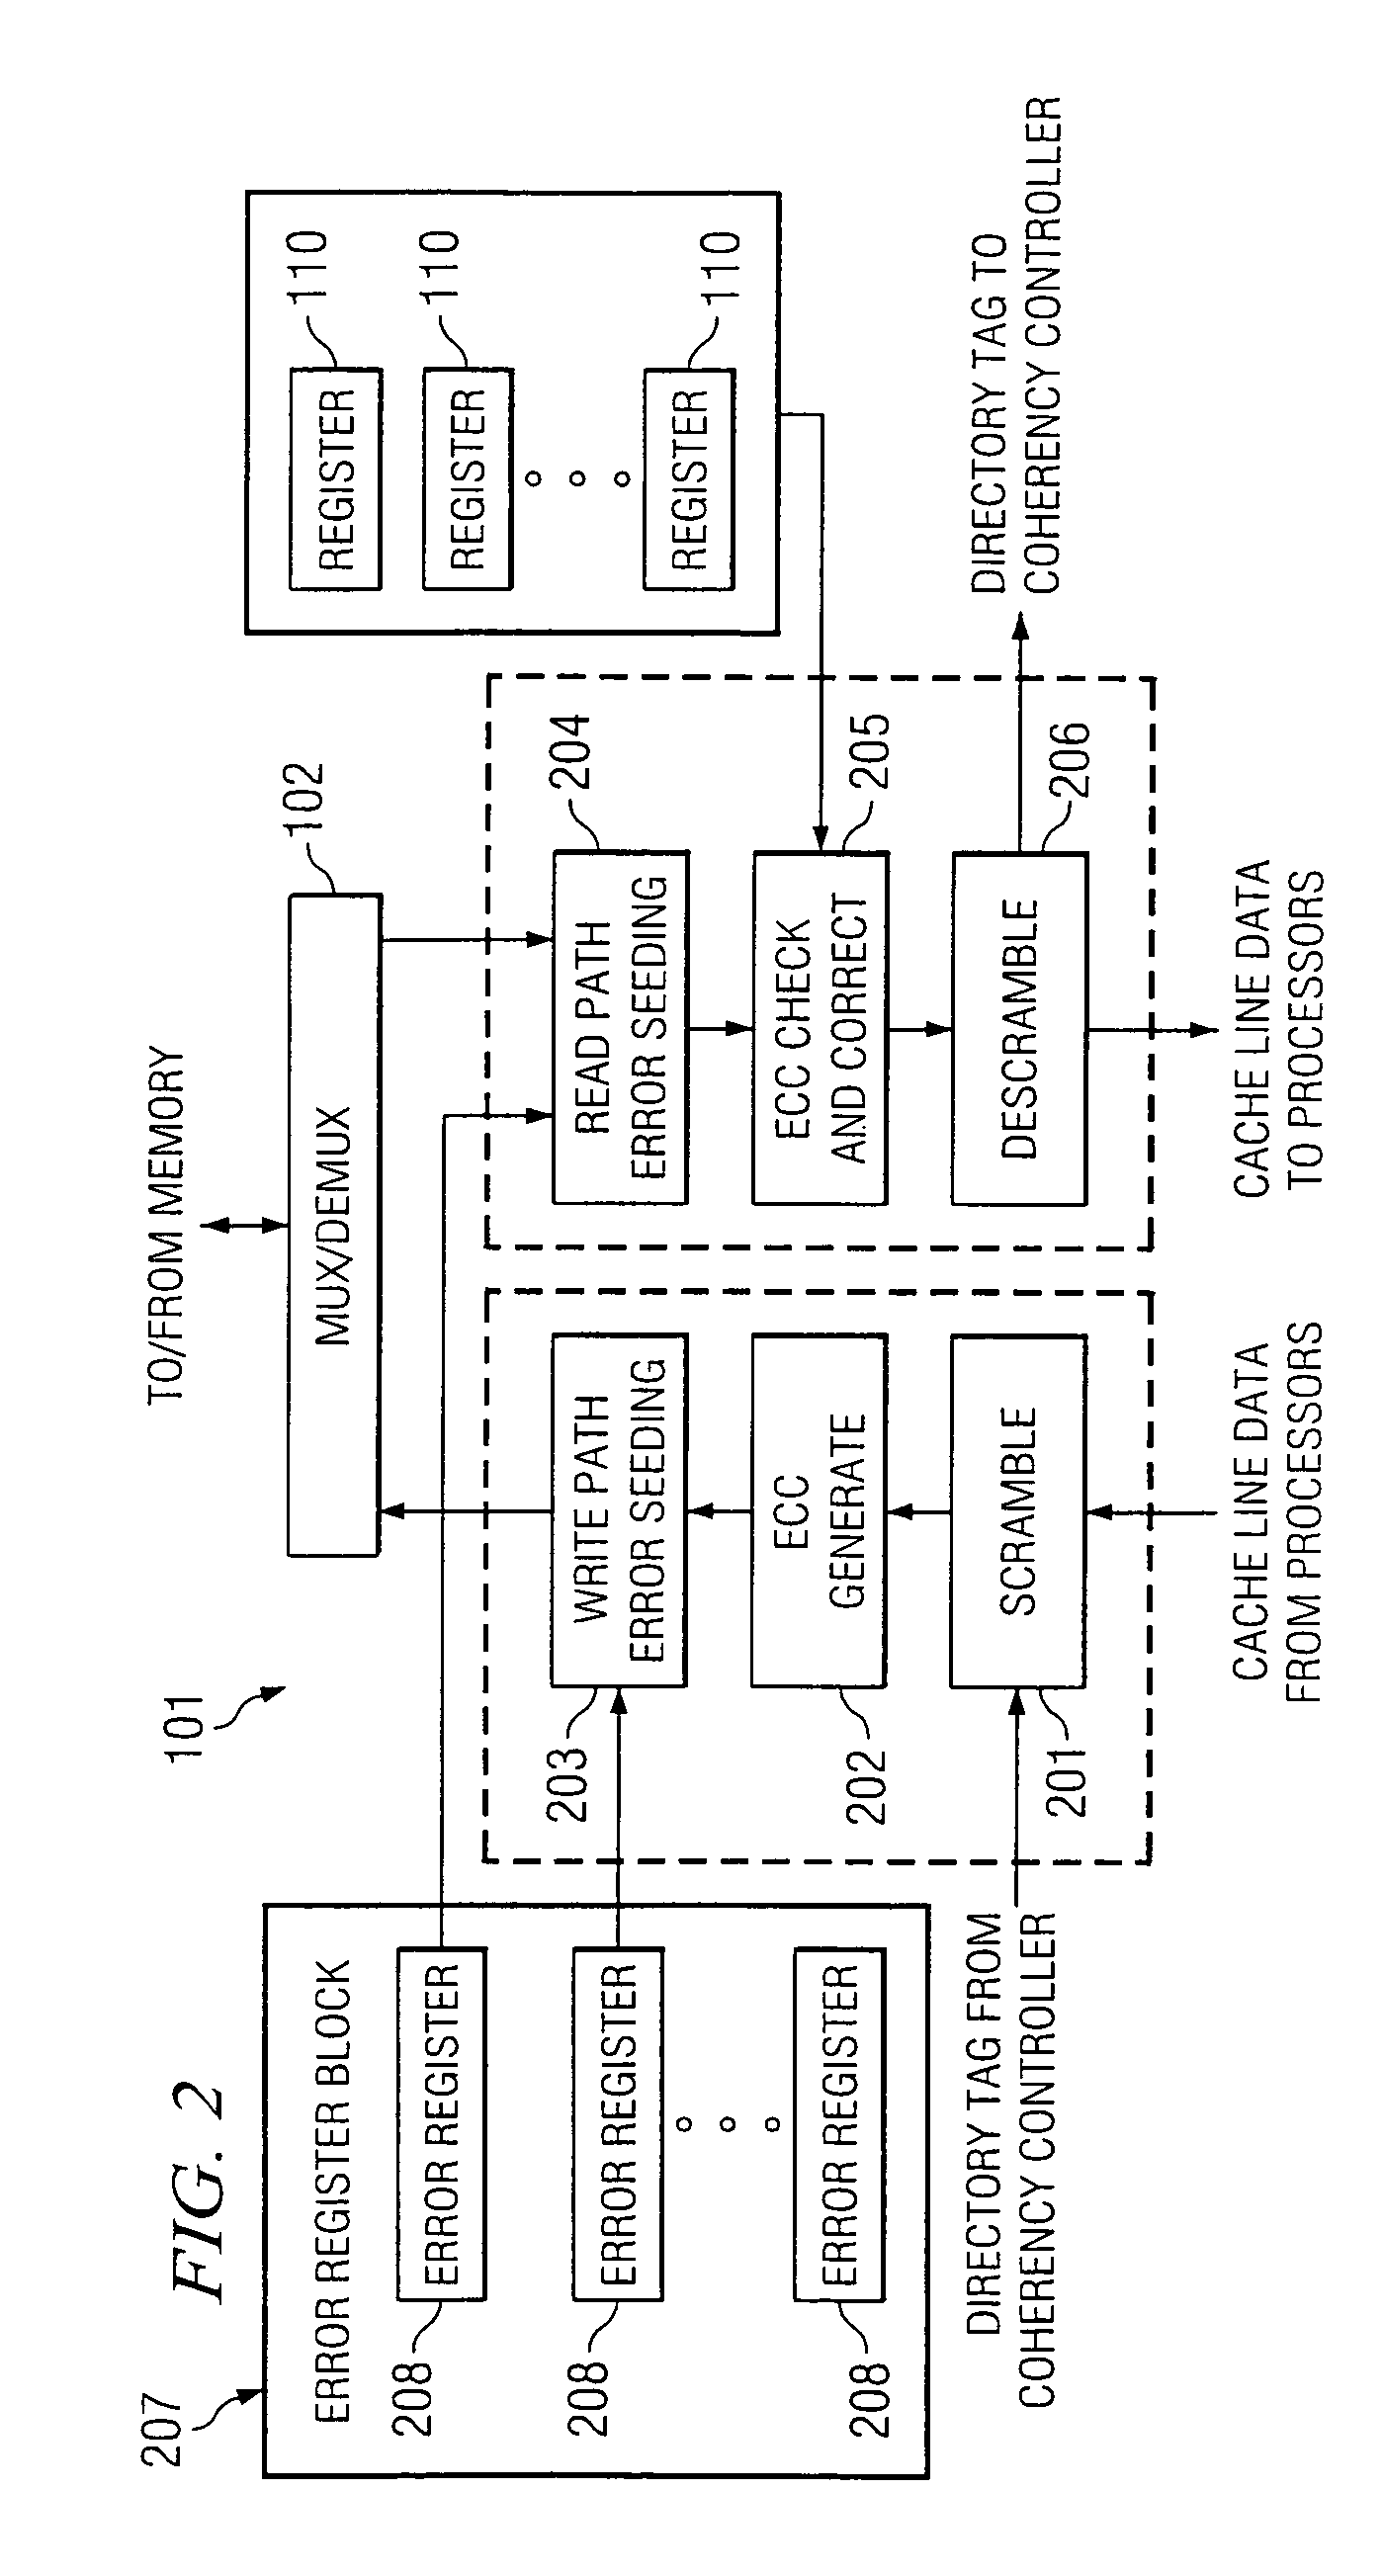 Systems and methods for providing error correction code testing functionality